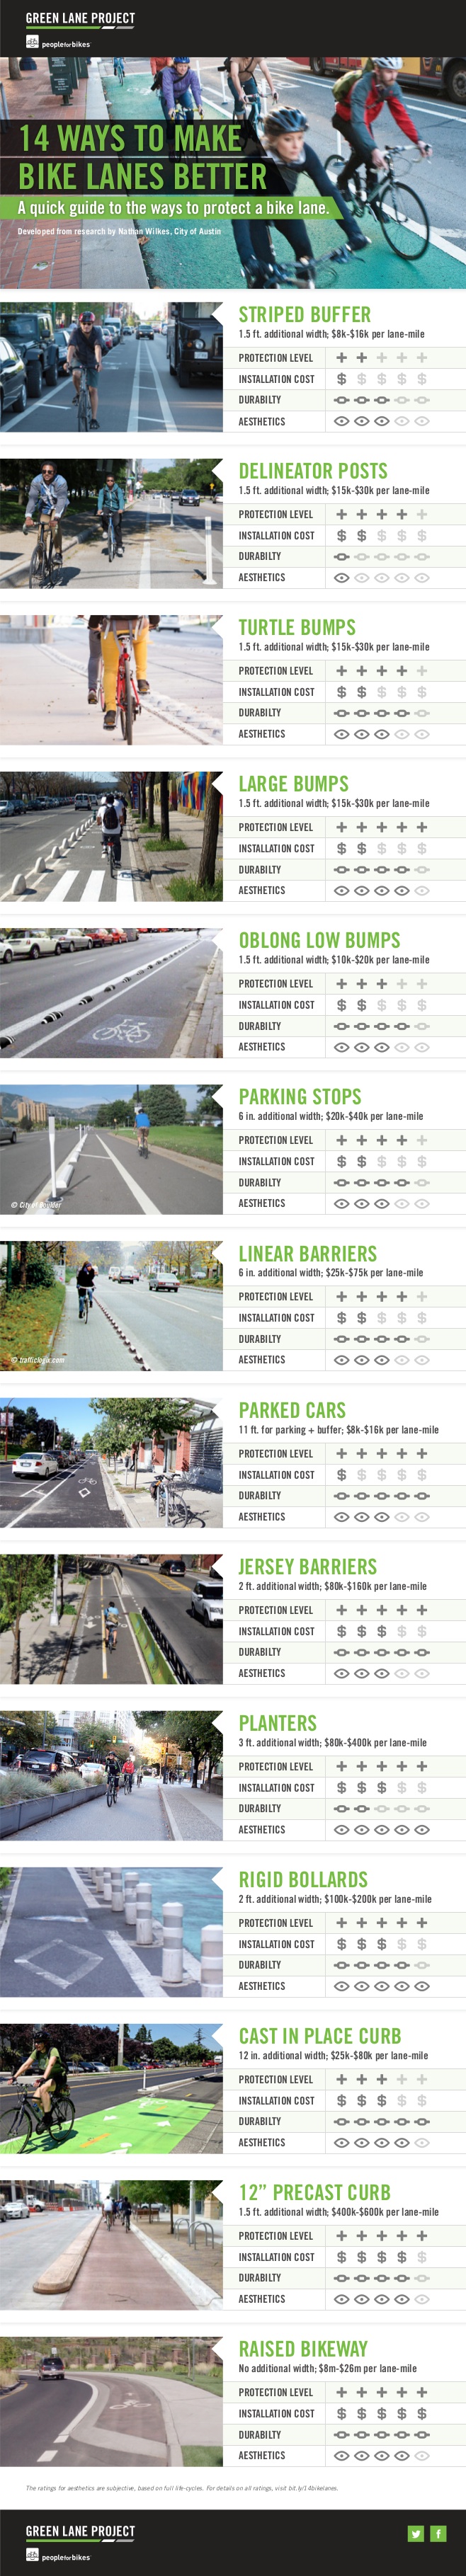 Reference: http://www.peopleforbikes.org/blog/entry/14-ways-to-make-bike-lanes-better-the-infographic